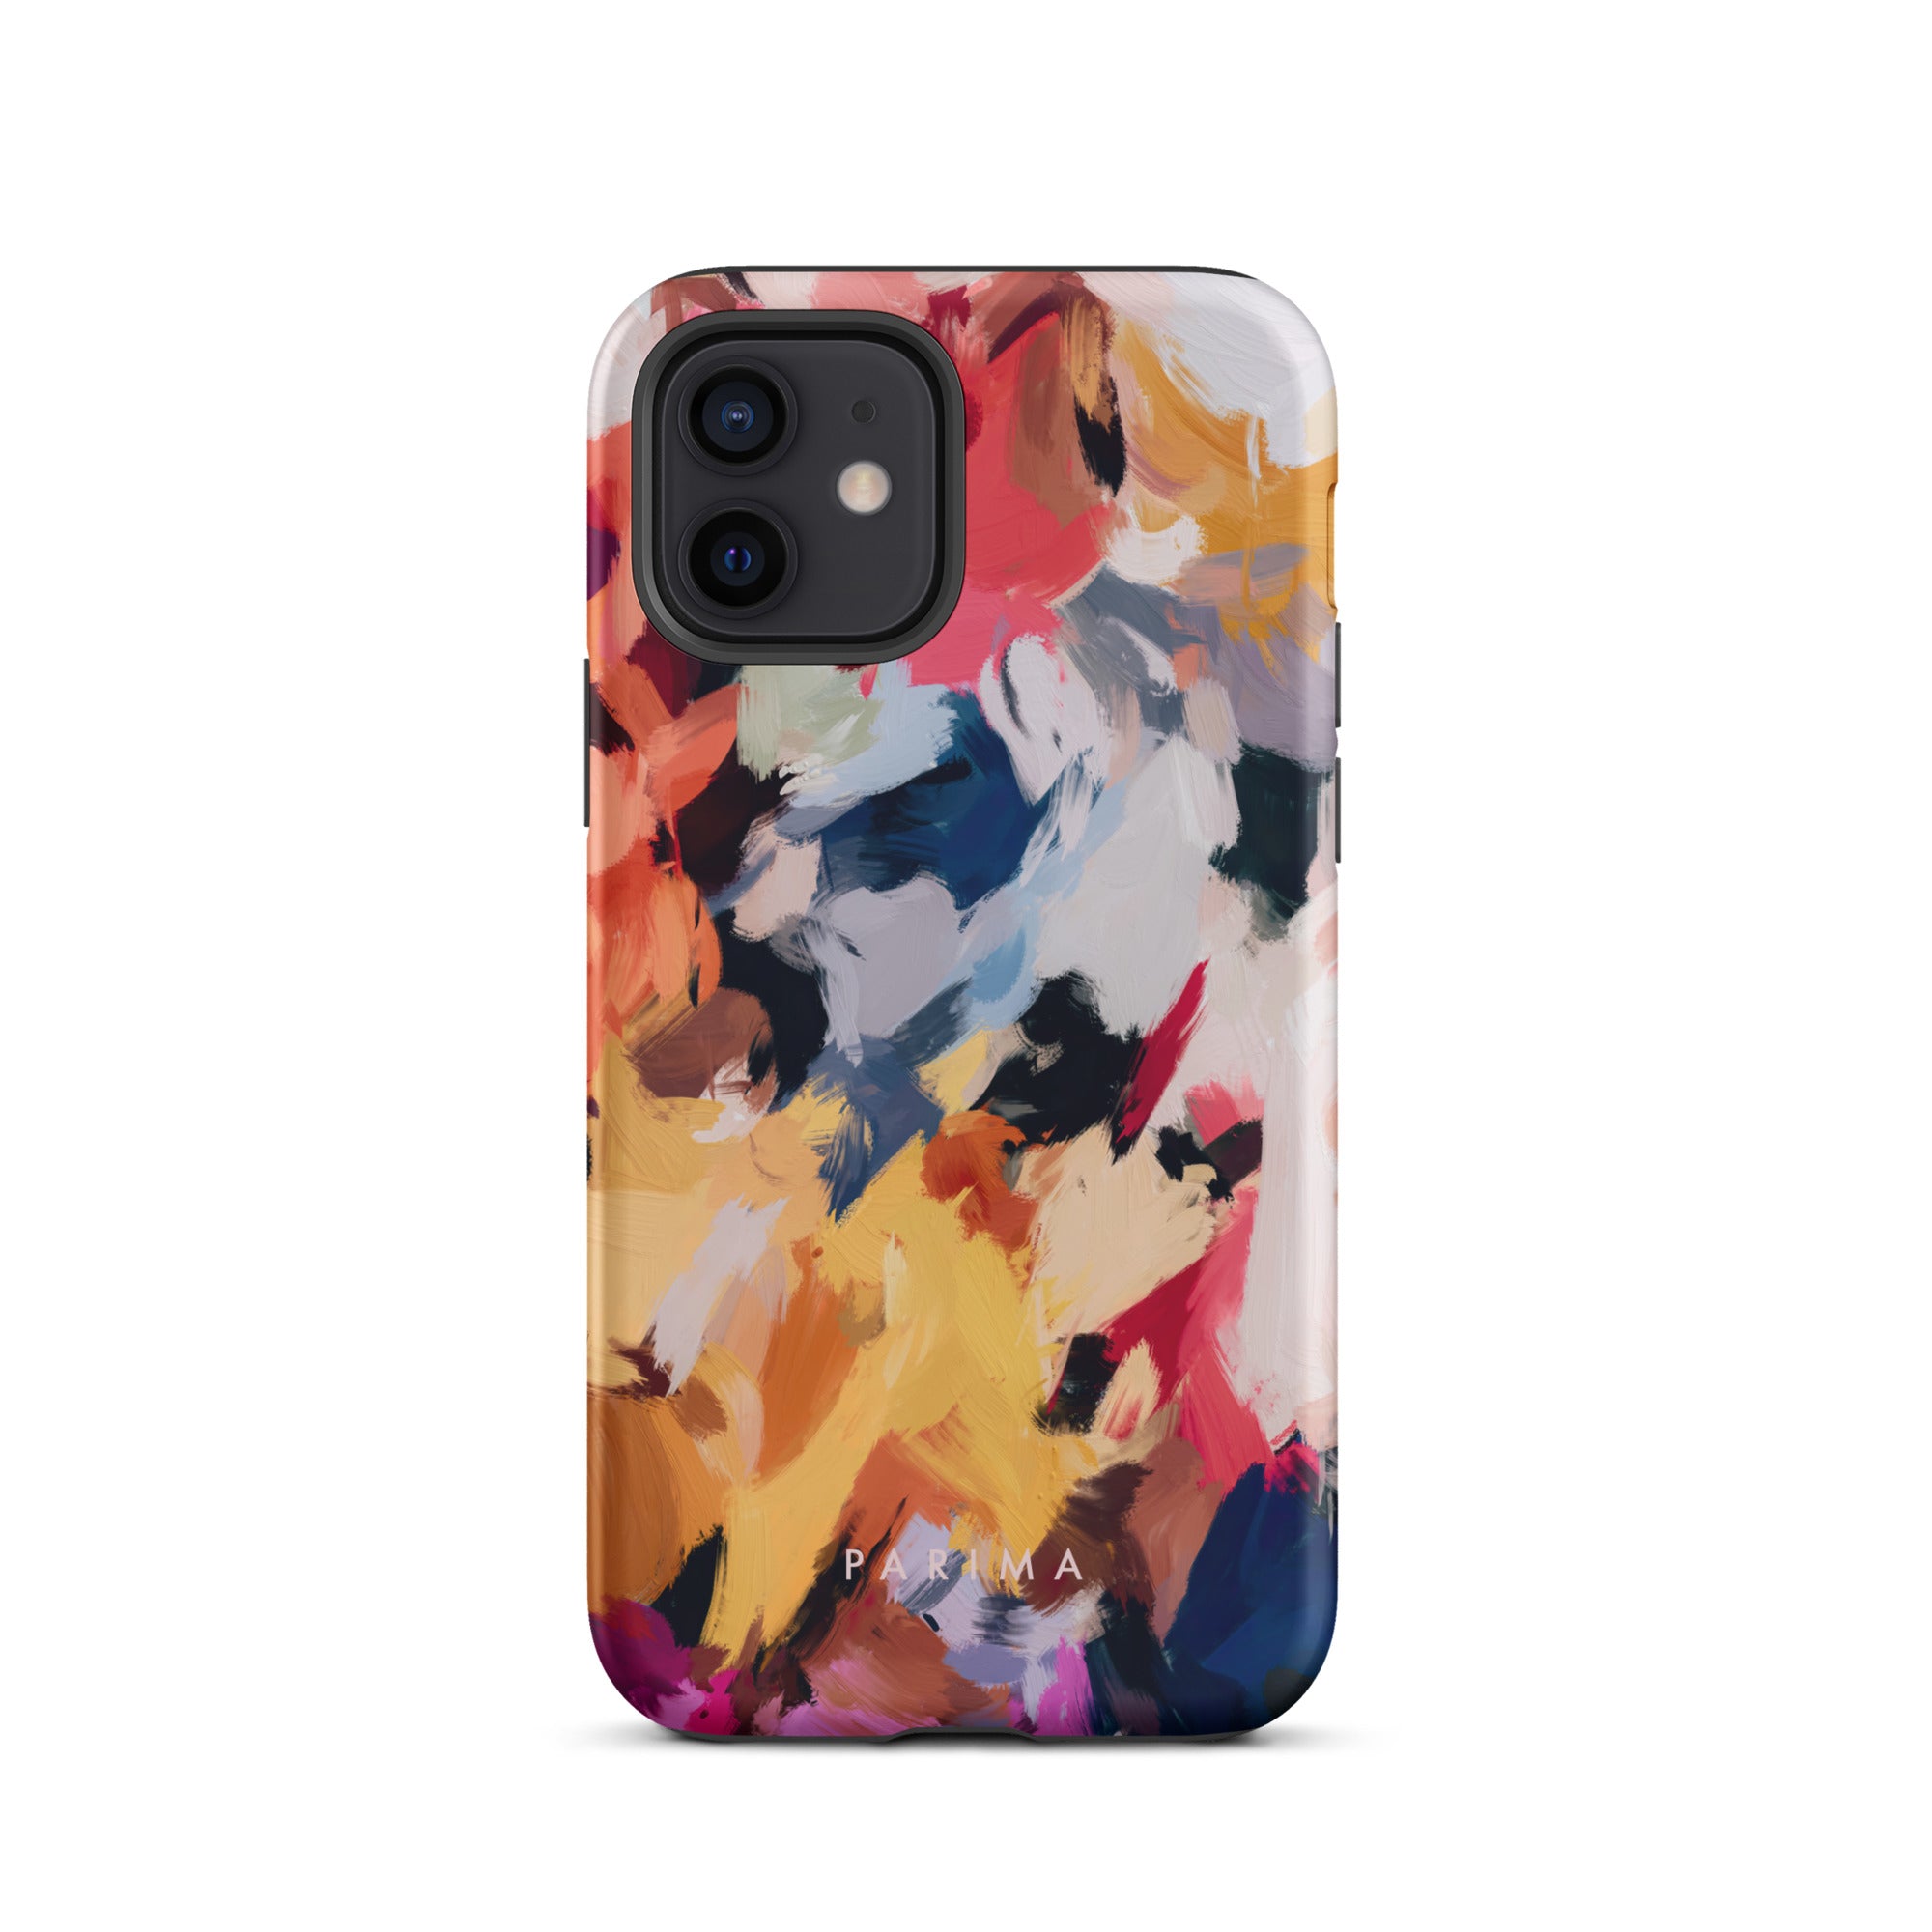 Wilde, blue and yellow abstract art on iPhone 12 tough case by Parima Studio